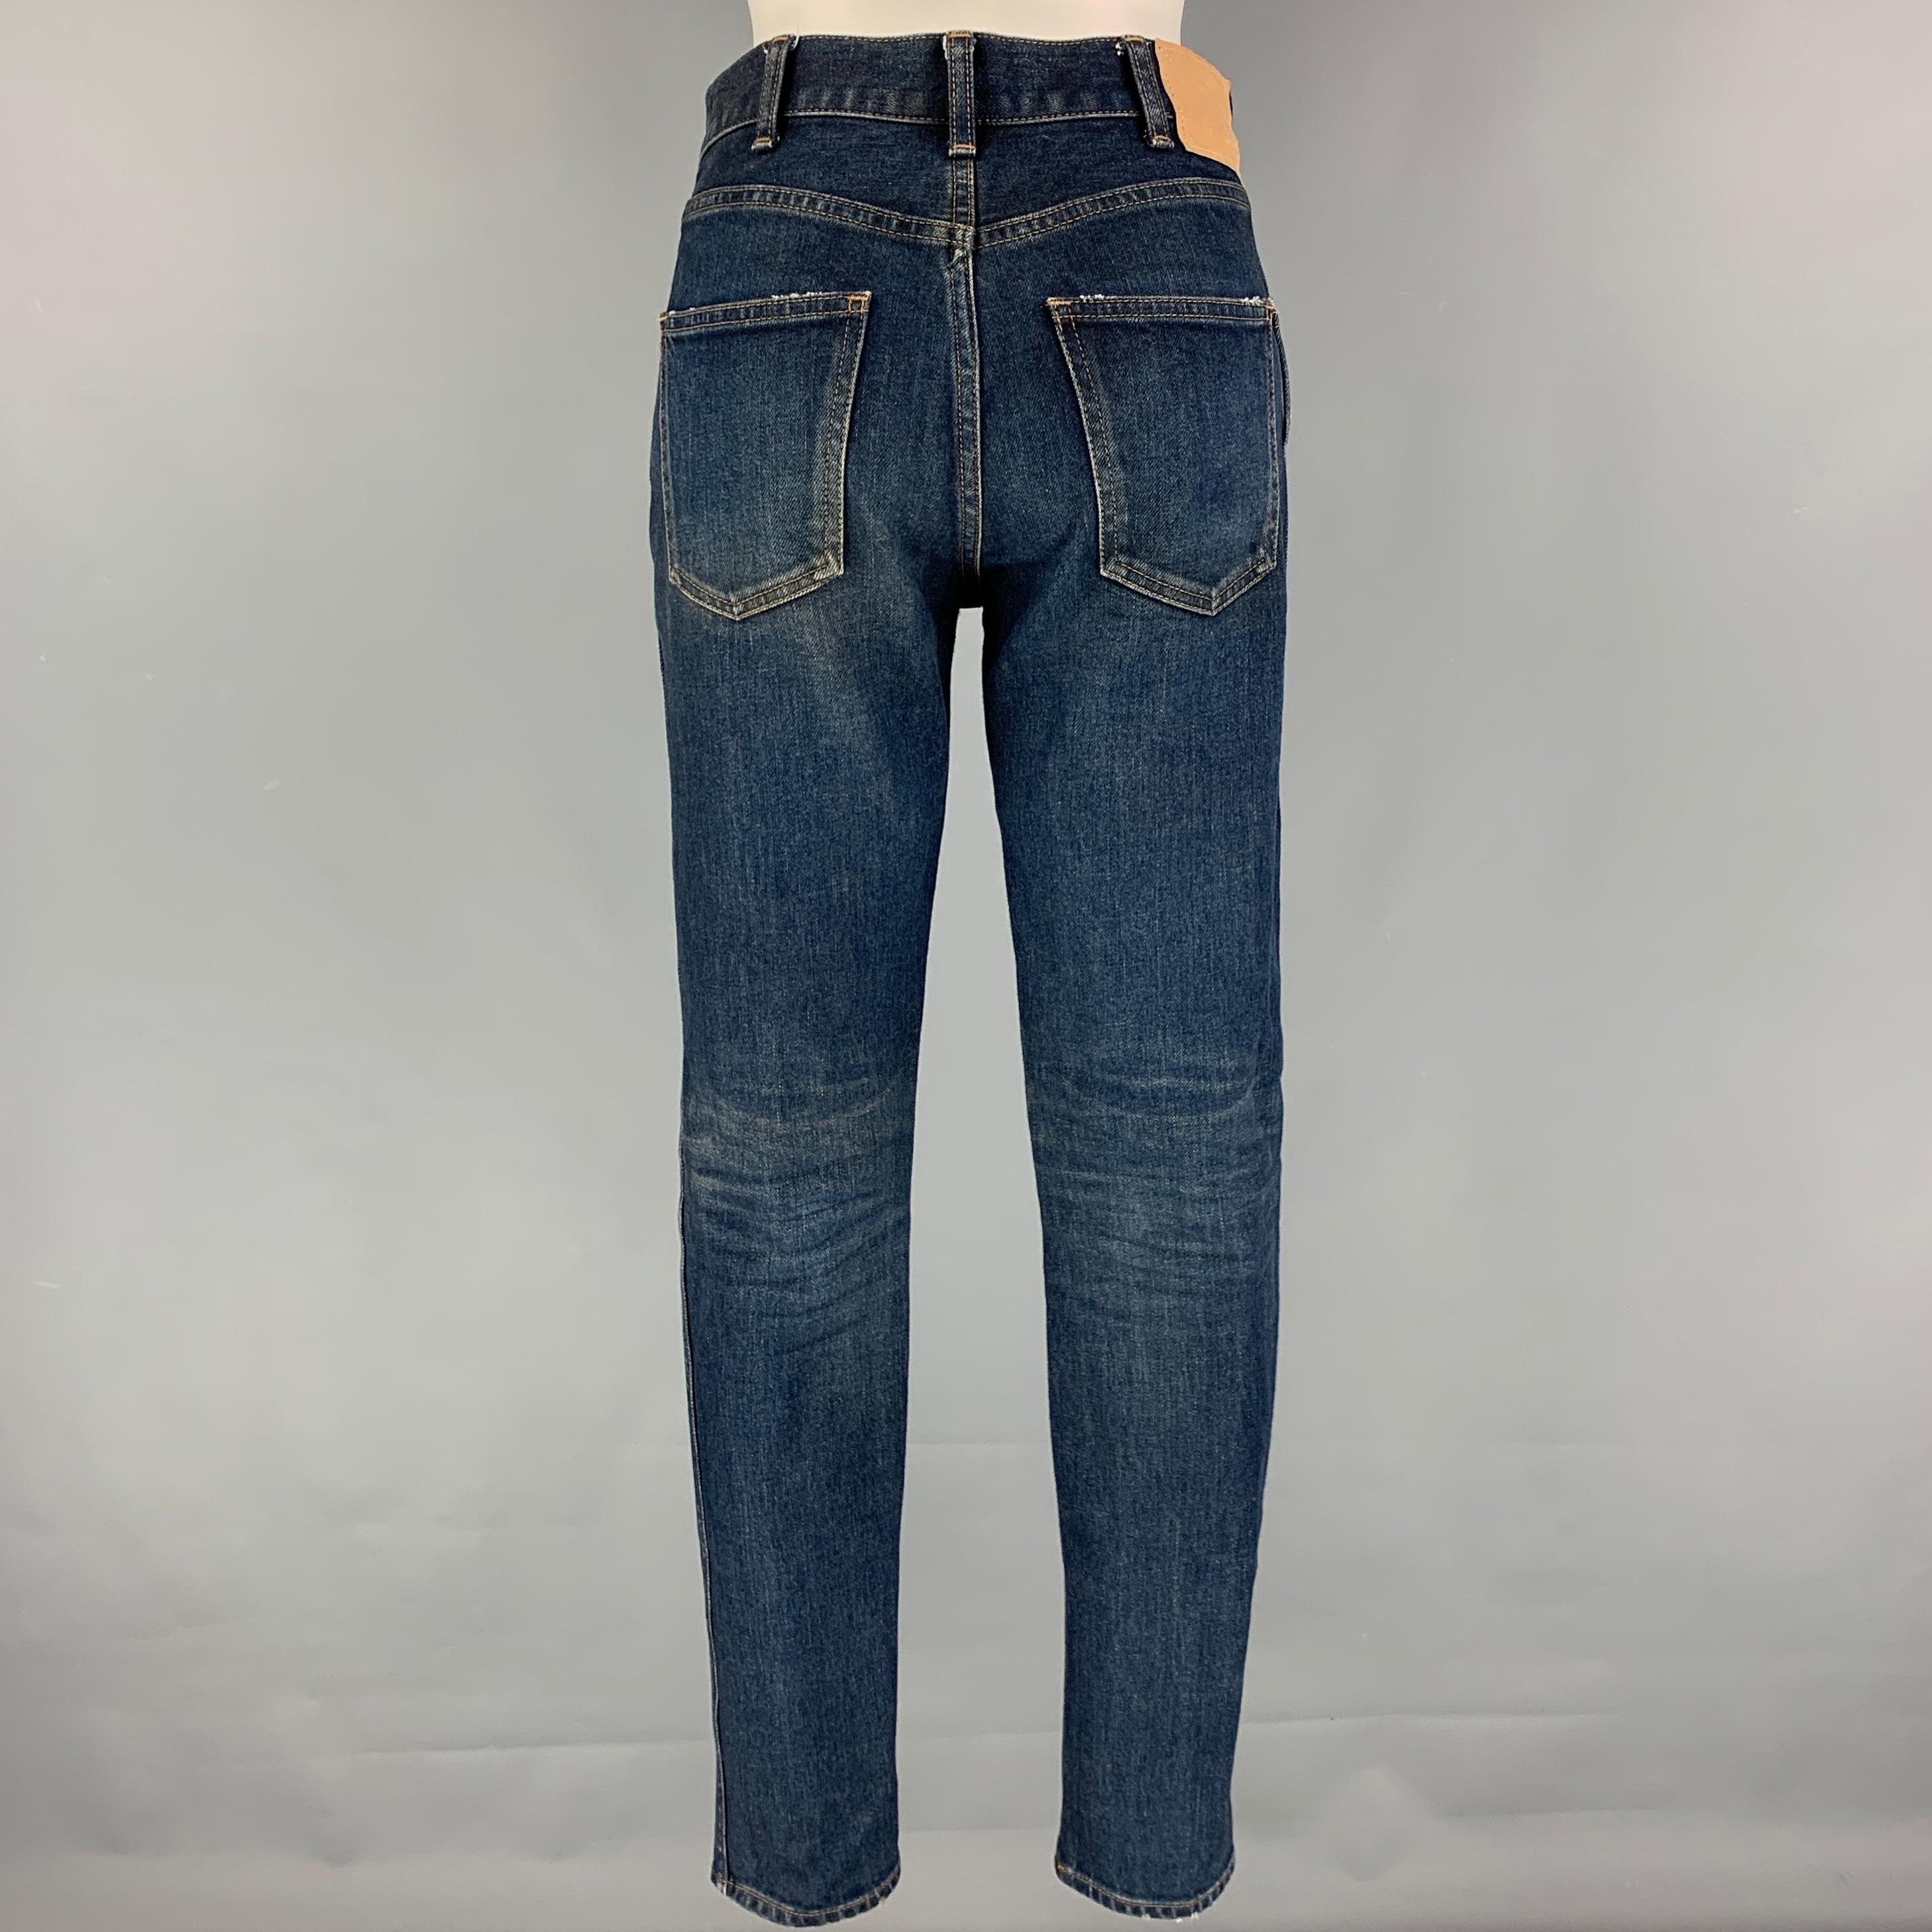 CELINE 'Slim Patch' jeans comes in a dark blue cotton featuring a slim fit, contrast stitching, and a zip fly closure. Made in Japan. 

Very Good Pre-Owned Condition.
Marked: 26
Original Retail Price: $607.00

Measurements:

Waist: 28 in.
Rise: 9.5